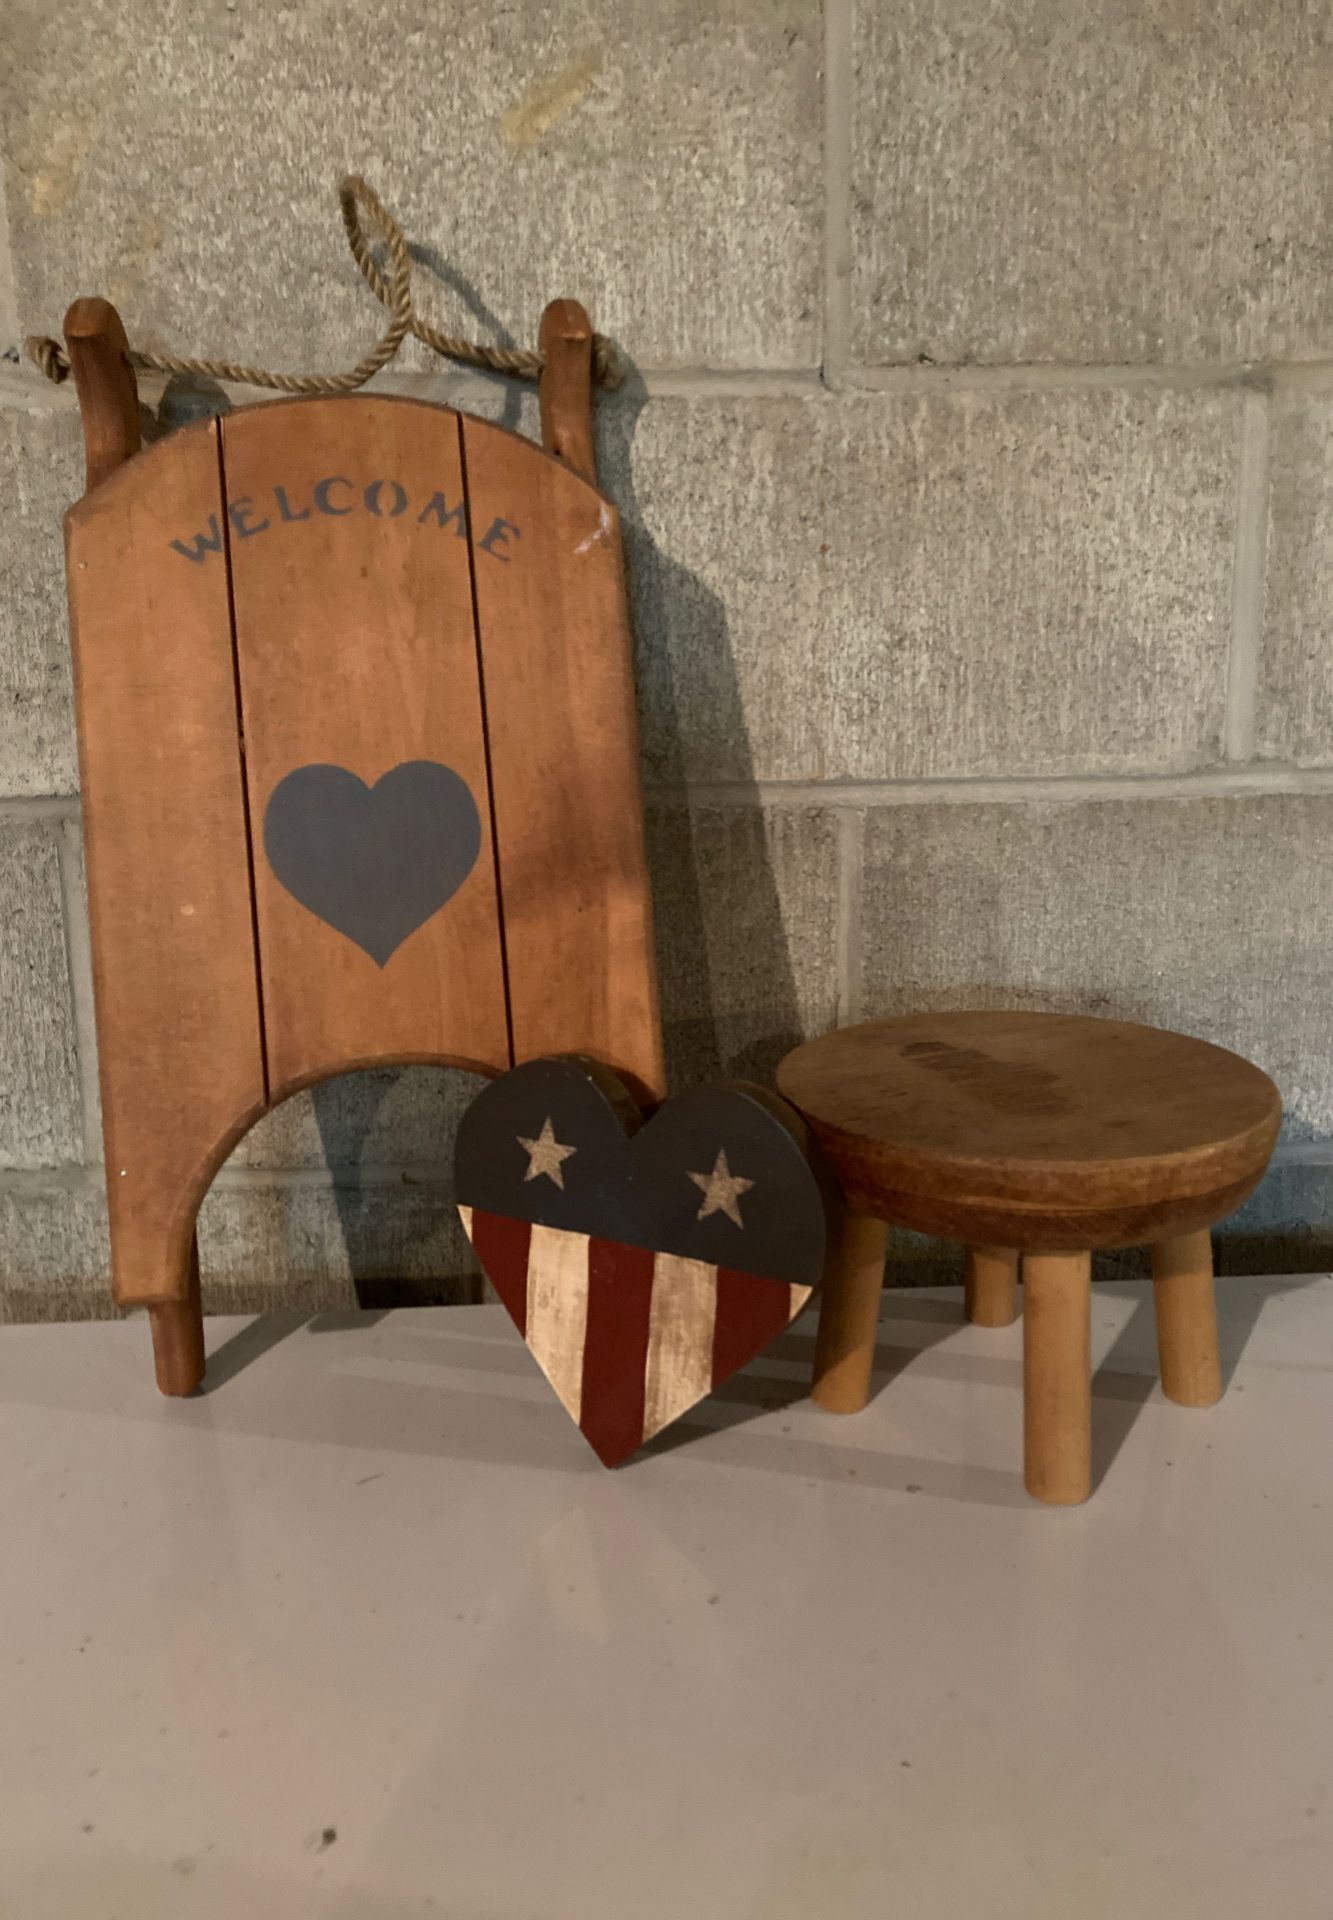 Wooden welcome sleigh with small wooden stool & wooden heart flag